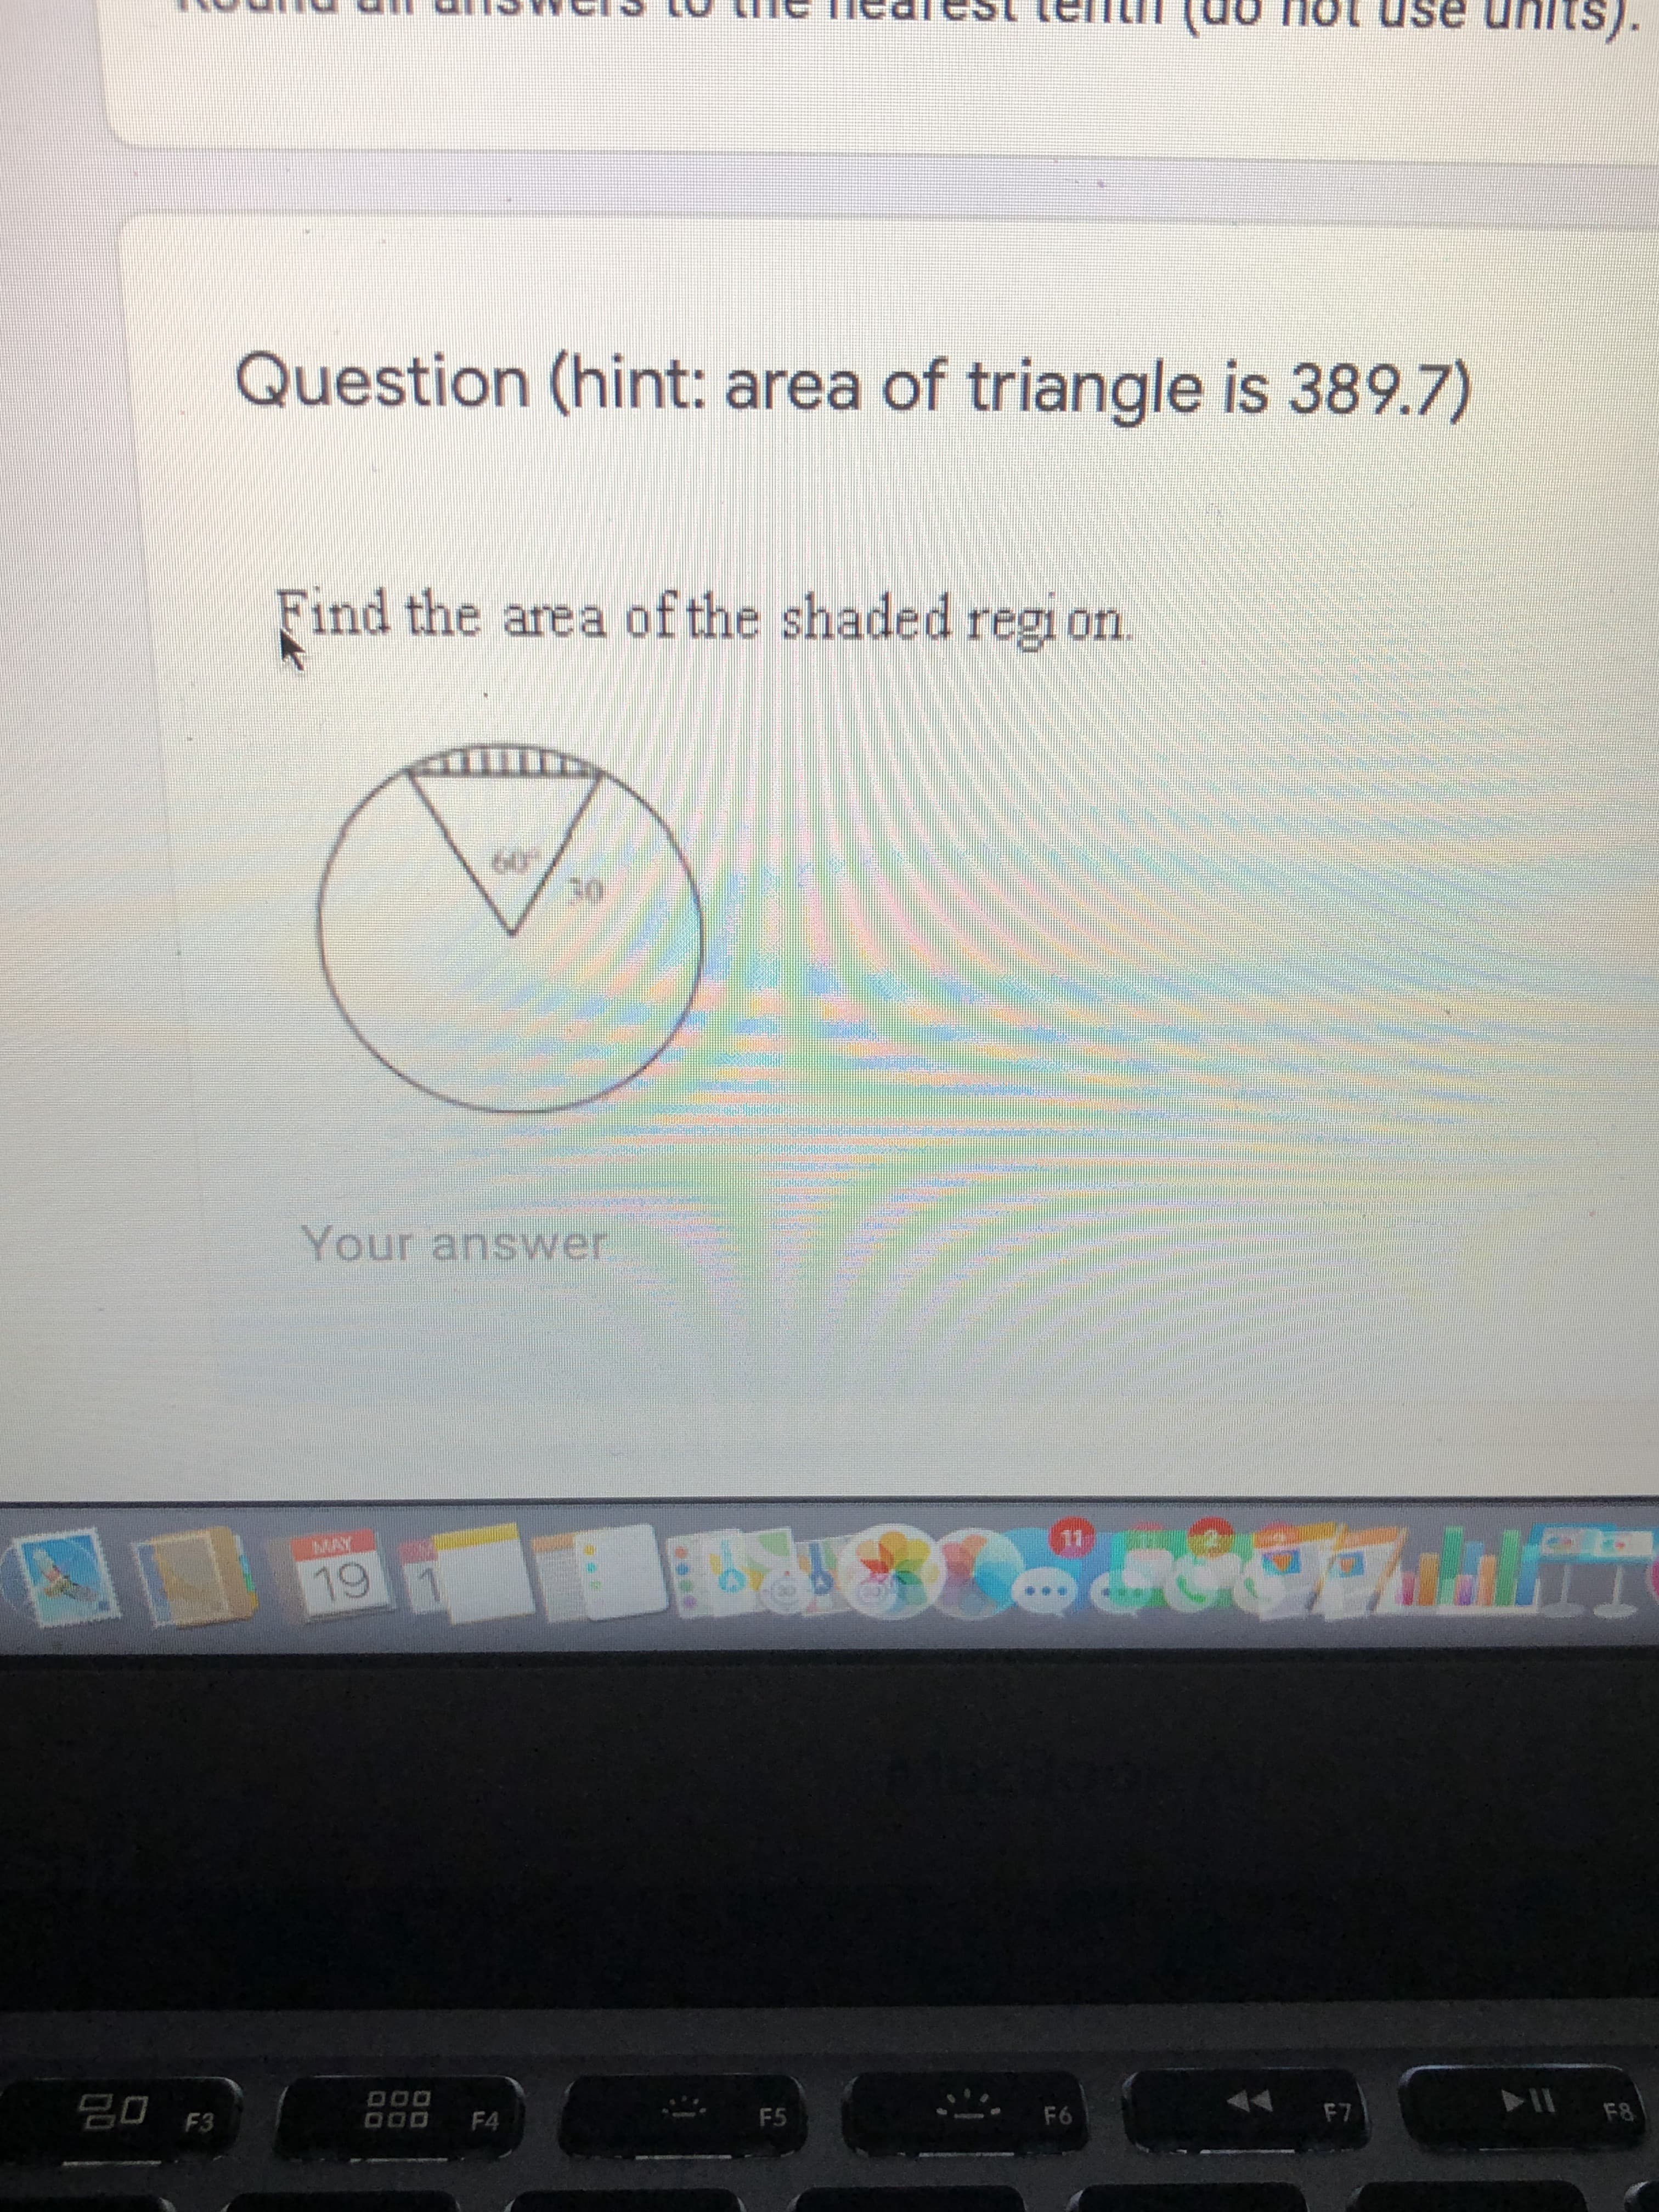 (hint: area of triangle is 389.7)
